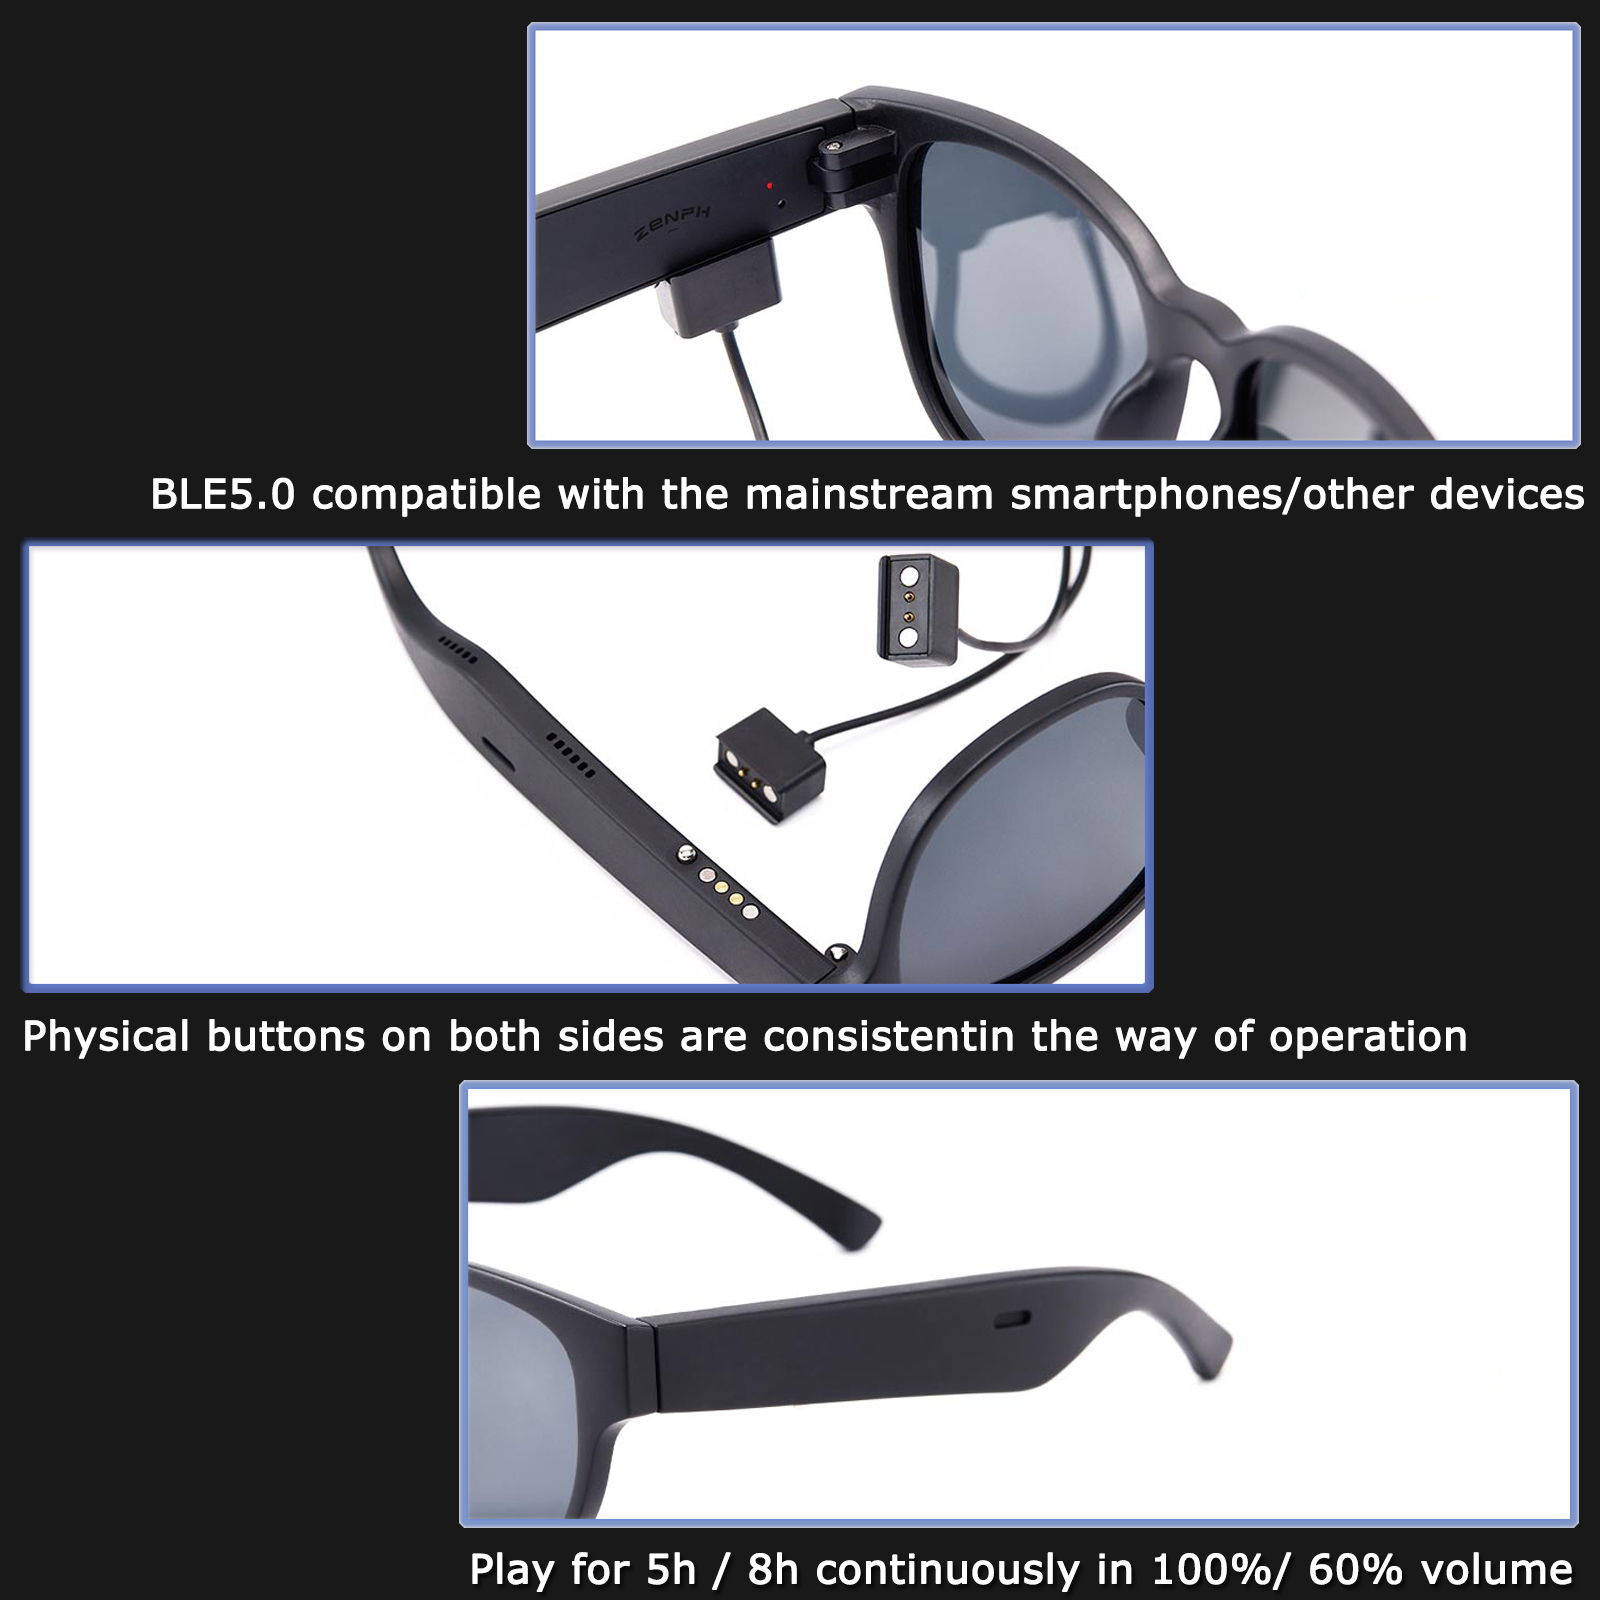 Smart Glasses/Audio Sunglasses, Voice Control and Open Ear Style Listen to music and calls with volume up and down, 6-hour battery life, Bluetooth 5.0 smart glasses and - image 5 of 7